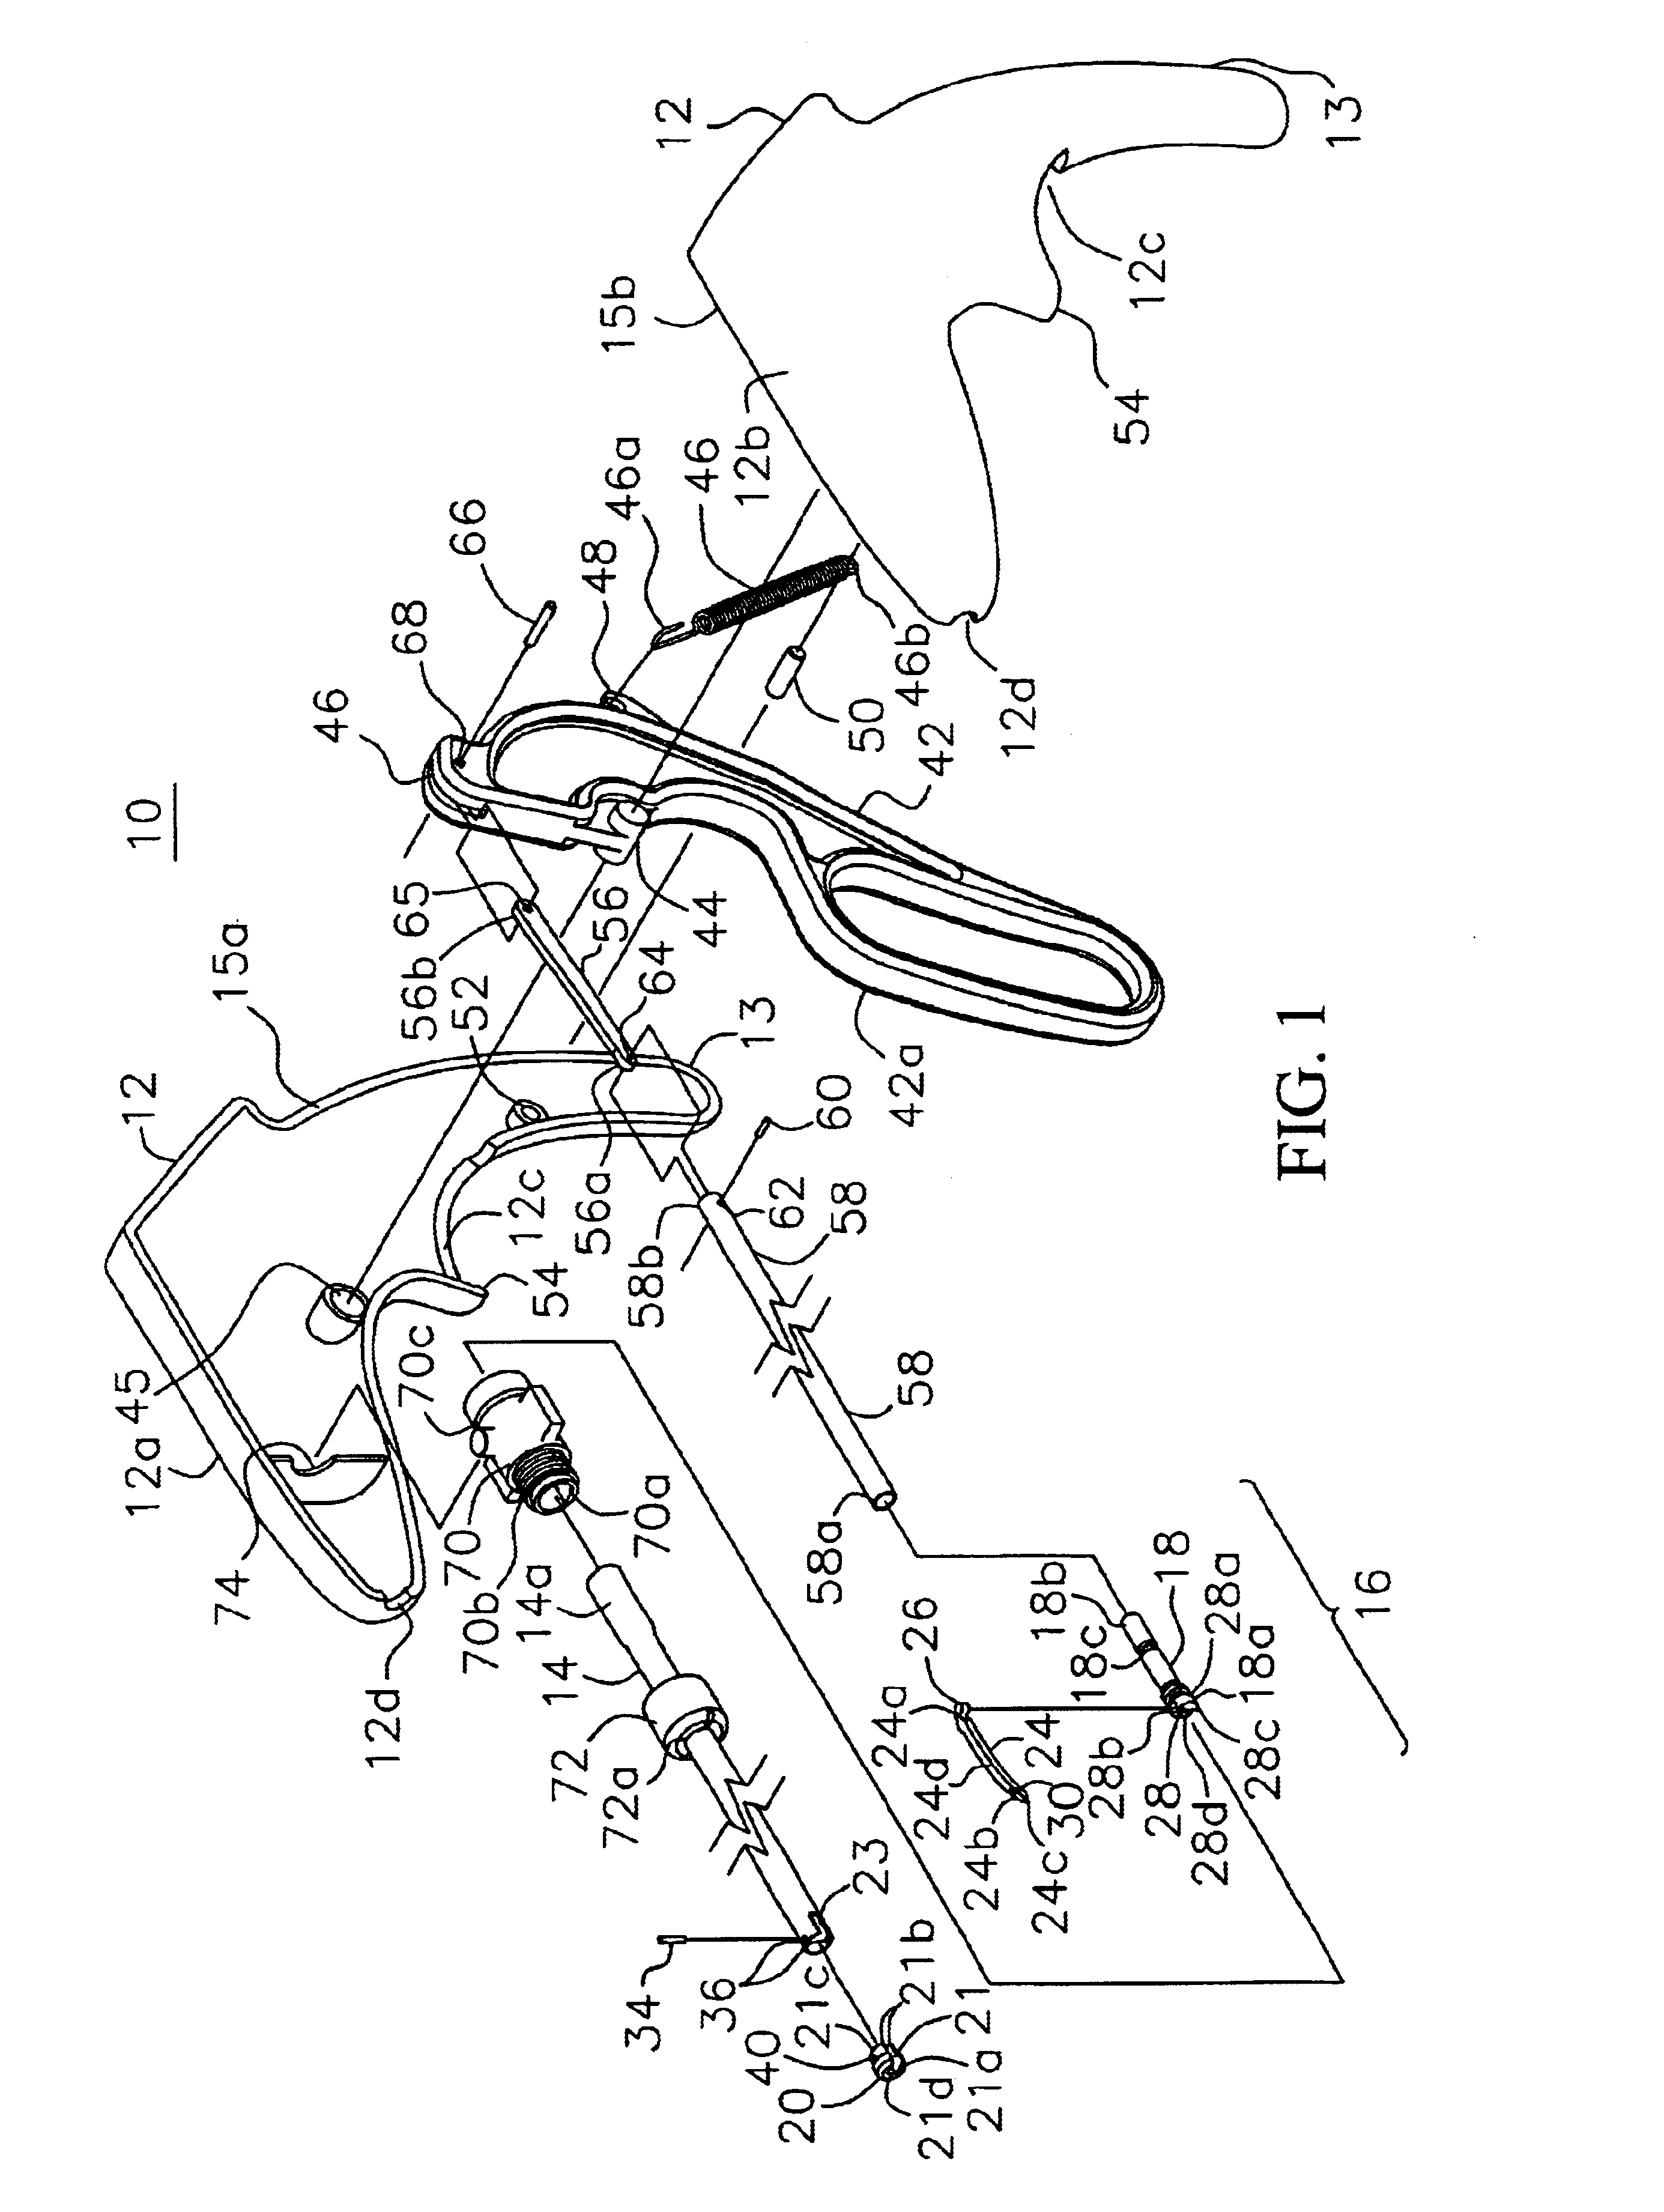 Apparatus for sewing tissue and method of use